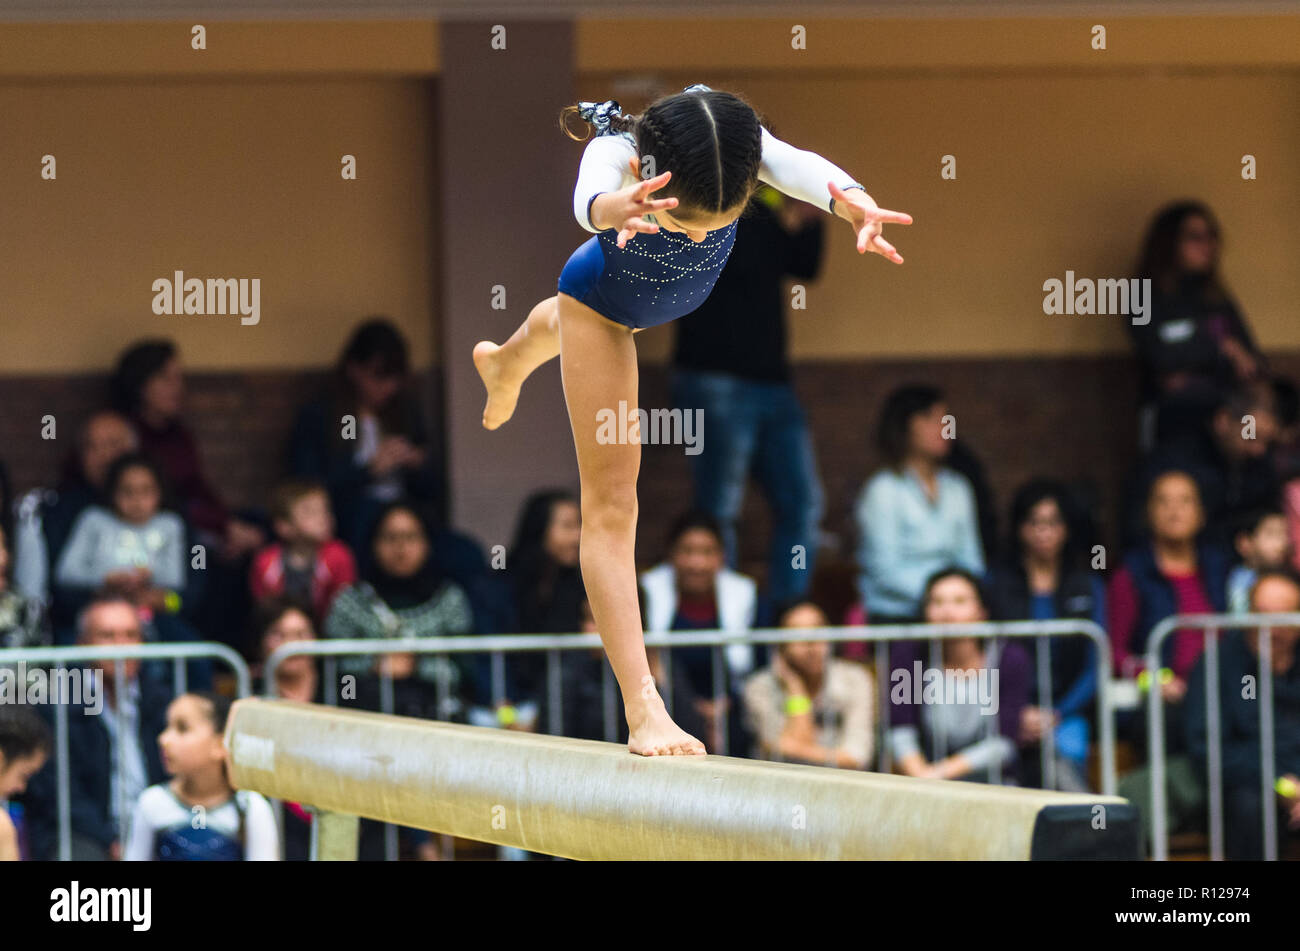 Young female gymnast performing handstand on balance beam, side view Stock Photo